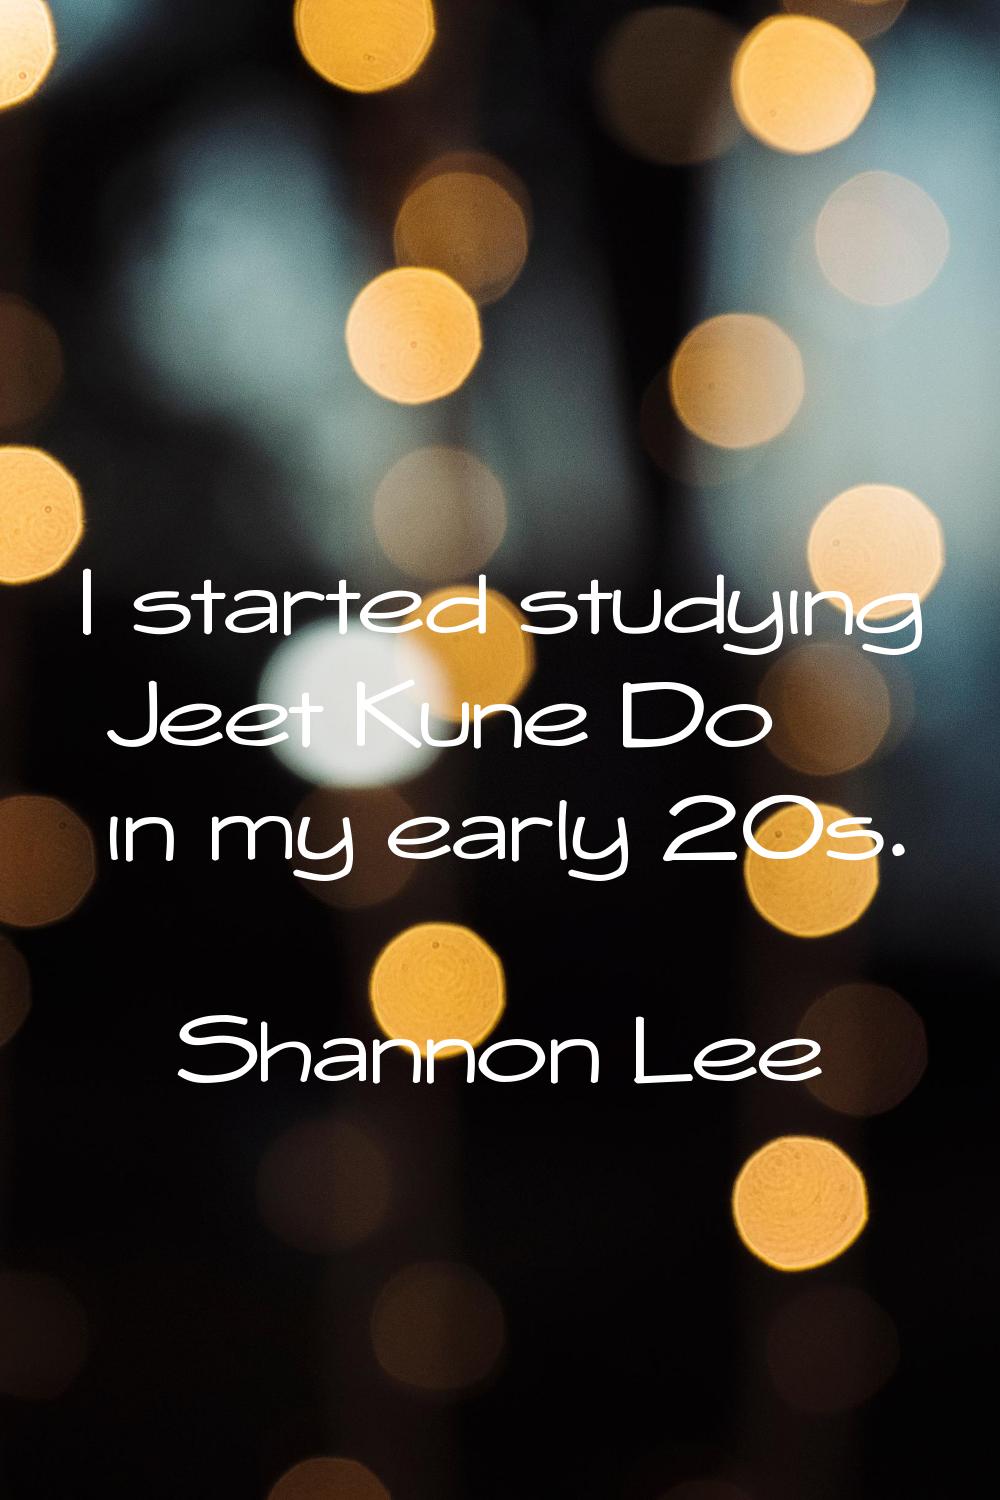 I started studying Jeet Kune Do in my early 20s.